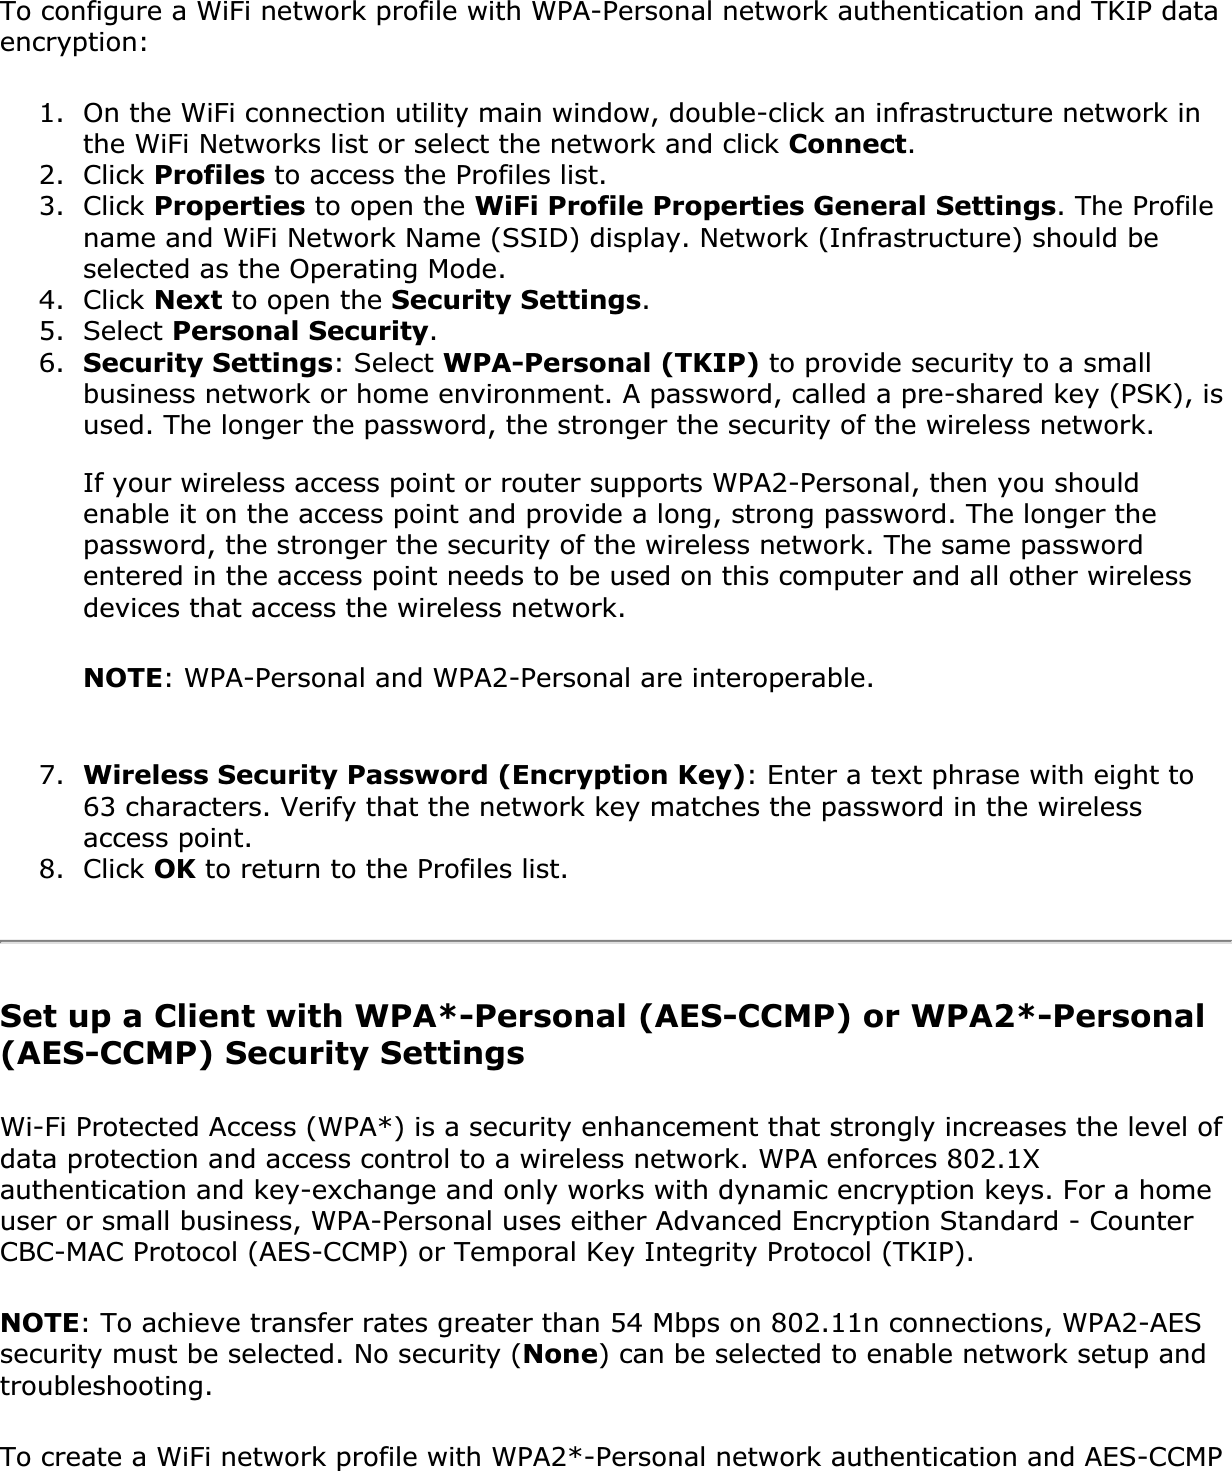 To configure a WiFi network profile with WPA-Personal network authentication and TKIP data encryption:1. On the WiFi connection utility main window, double-click an infrastructure network in the WiFi Networks list or select the network and click Connect.2. Click Profiles to access the Profiles list.3. Click Properties to open the WiFi Profile Properties General Settings. The Profile name and WiFi Network Name (SSID) display. Network (Infrastructure) should be selected as the Operating Mode.4. Click Next to open the Security Settings.5. Select Personal Security.6. Security Settings: Select WPA-Personal (TKIP) to provide security to a small business network or home environment. A password, called a pre-shared key (PSK), is used. The longer the password, the stronger the security of the wireless network.If your wireless access point or router supports WPA2-Personal, then you should enable it on the access point and provide a long, strong password. The longer the password, the stronger the security of the wireless network. The same password entered in the access point needs to be used on this computer and all other wireless devices that access the wireless network.NOTE: WPA-Personal and WPA2-Personal are interoperable.7. Wireless Security Password (Encryption Key): Enter a text phrase with eight to 63 characters. Verify that the network key matches the password in the wireless access point.8. Click OK to return to the Profiles list.Set up a Client with WPA*-Personal (AES-CCMP) or WPA2*-Personal (AES-CCMP) Security SettingsWi-Fi Protected Access (WPA*) is a security enhancement that strongly increases the level of data protection and access control to a wireless network. WPA enforces 802.1X authentication and key-exchange and only works with dynamic encryption keys. For a home user or small business, WPA-Personal uses either Advanced Encryption Standard - Counter CBC-MAC Protocol (AES-CCMP) or Temporal Key Integrity Protocol (TKIP).NOTE: To achieve transfer rates greater than 54 Mbps on 802.11n connections, WPA2-AES security must be selected. No security (None) can be selected to enable network setup and troubleshooting.To create a WiFi network profile with WPA2*-Personal network authentication and AES-CCMP 